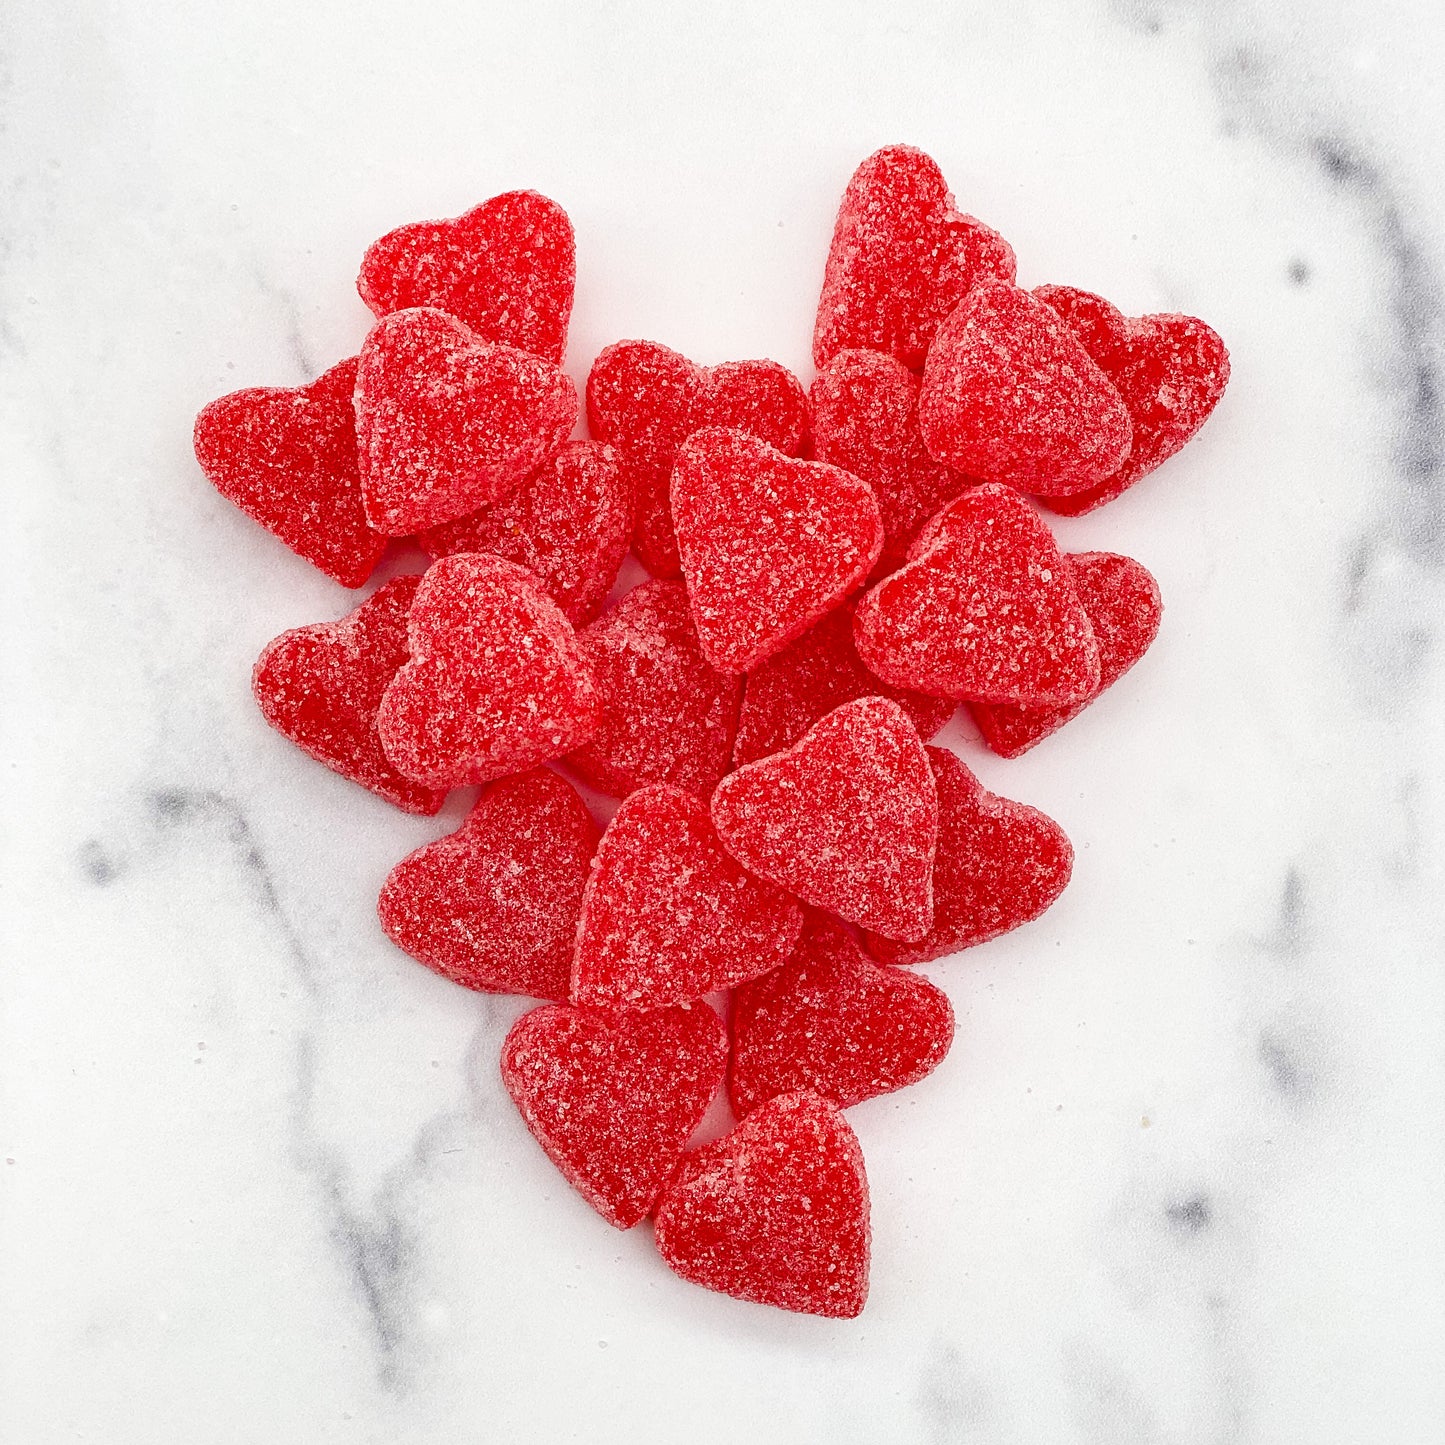 Sour Cherry Jelly Hearts